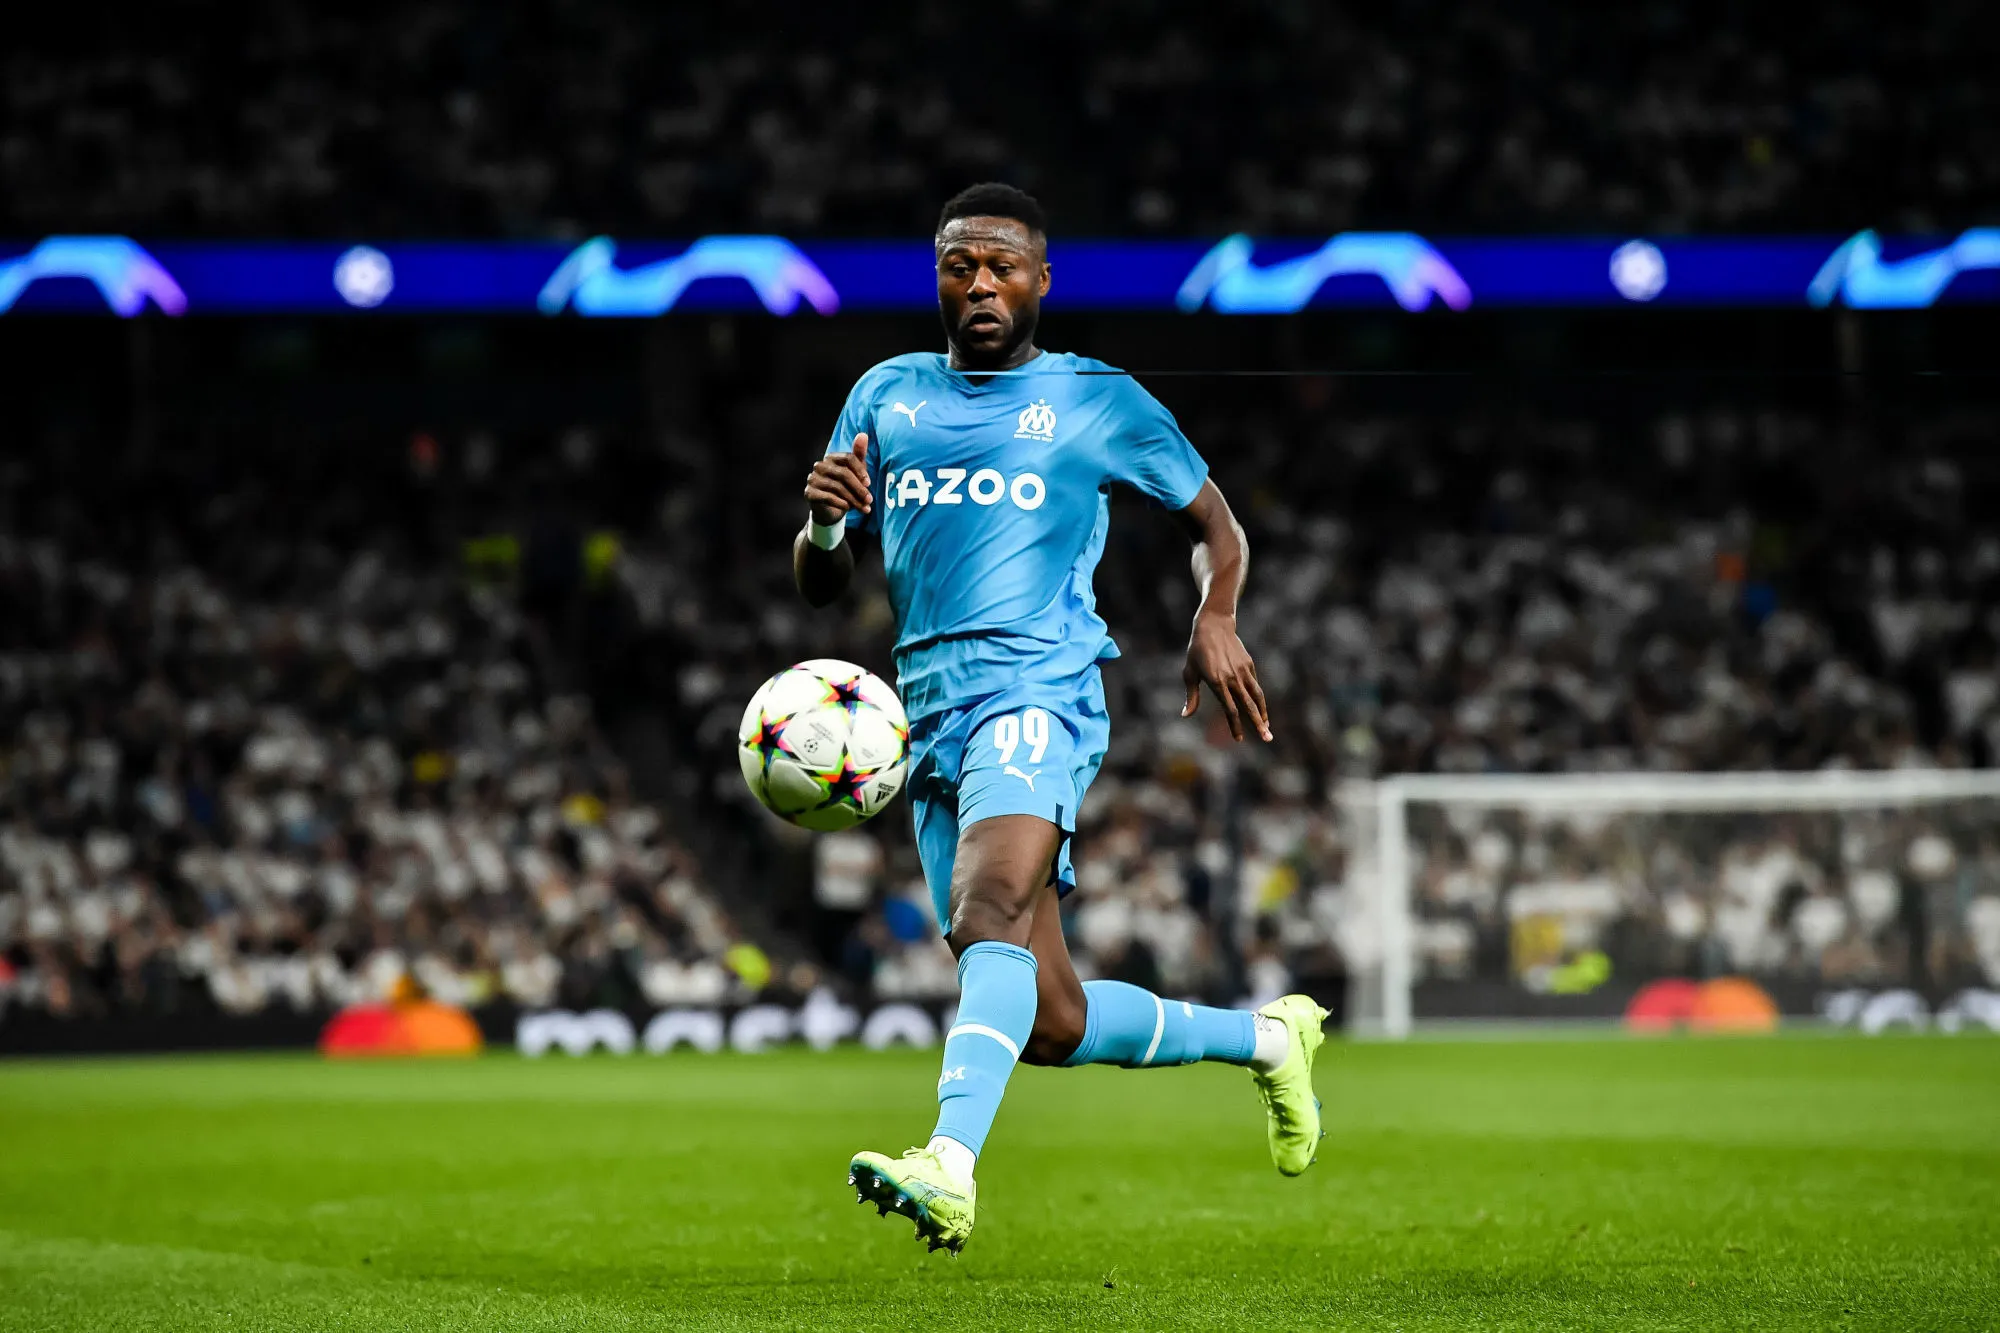 Mbemba : «<span style="font-size:50%">&nbsp;</span>Demain, on ne va pas faire d’erreur<span style="font-size:50%">&nbsp;</span>»